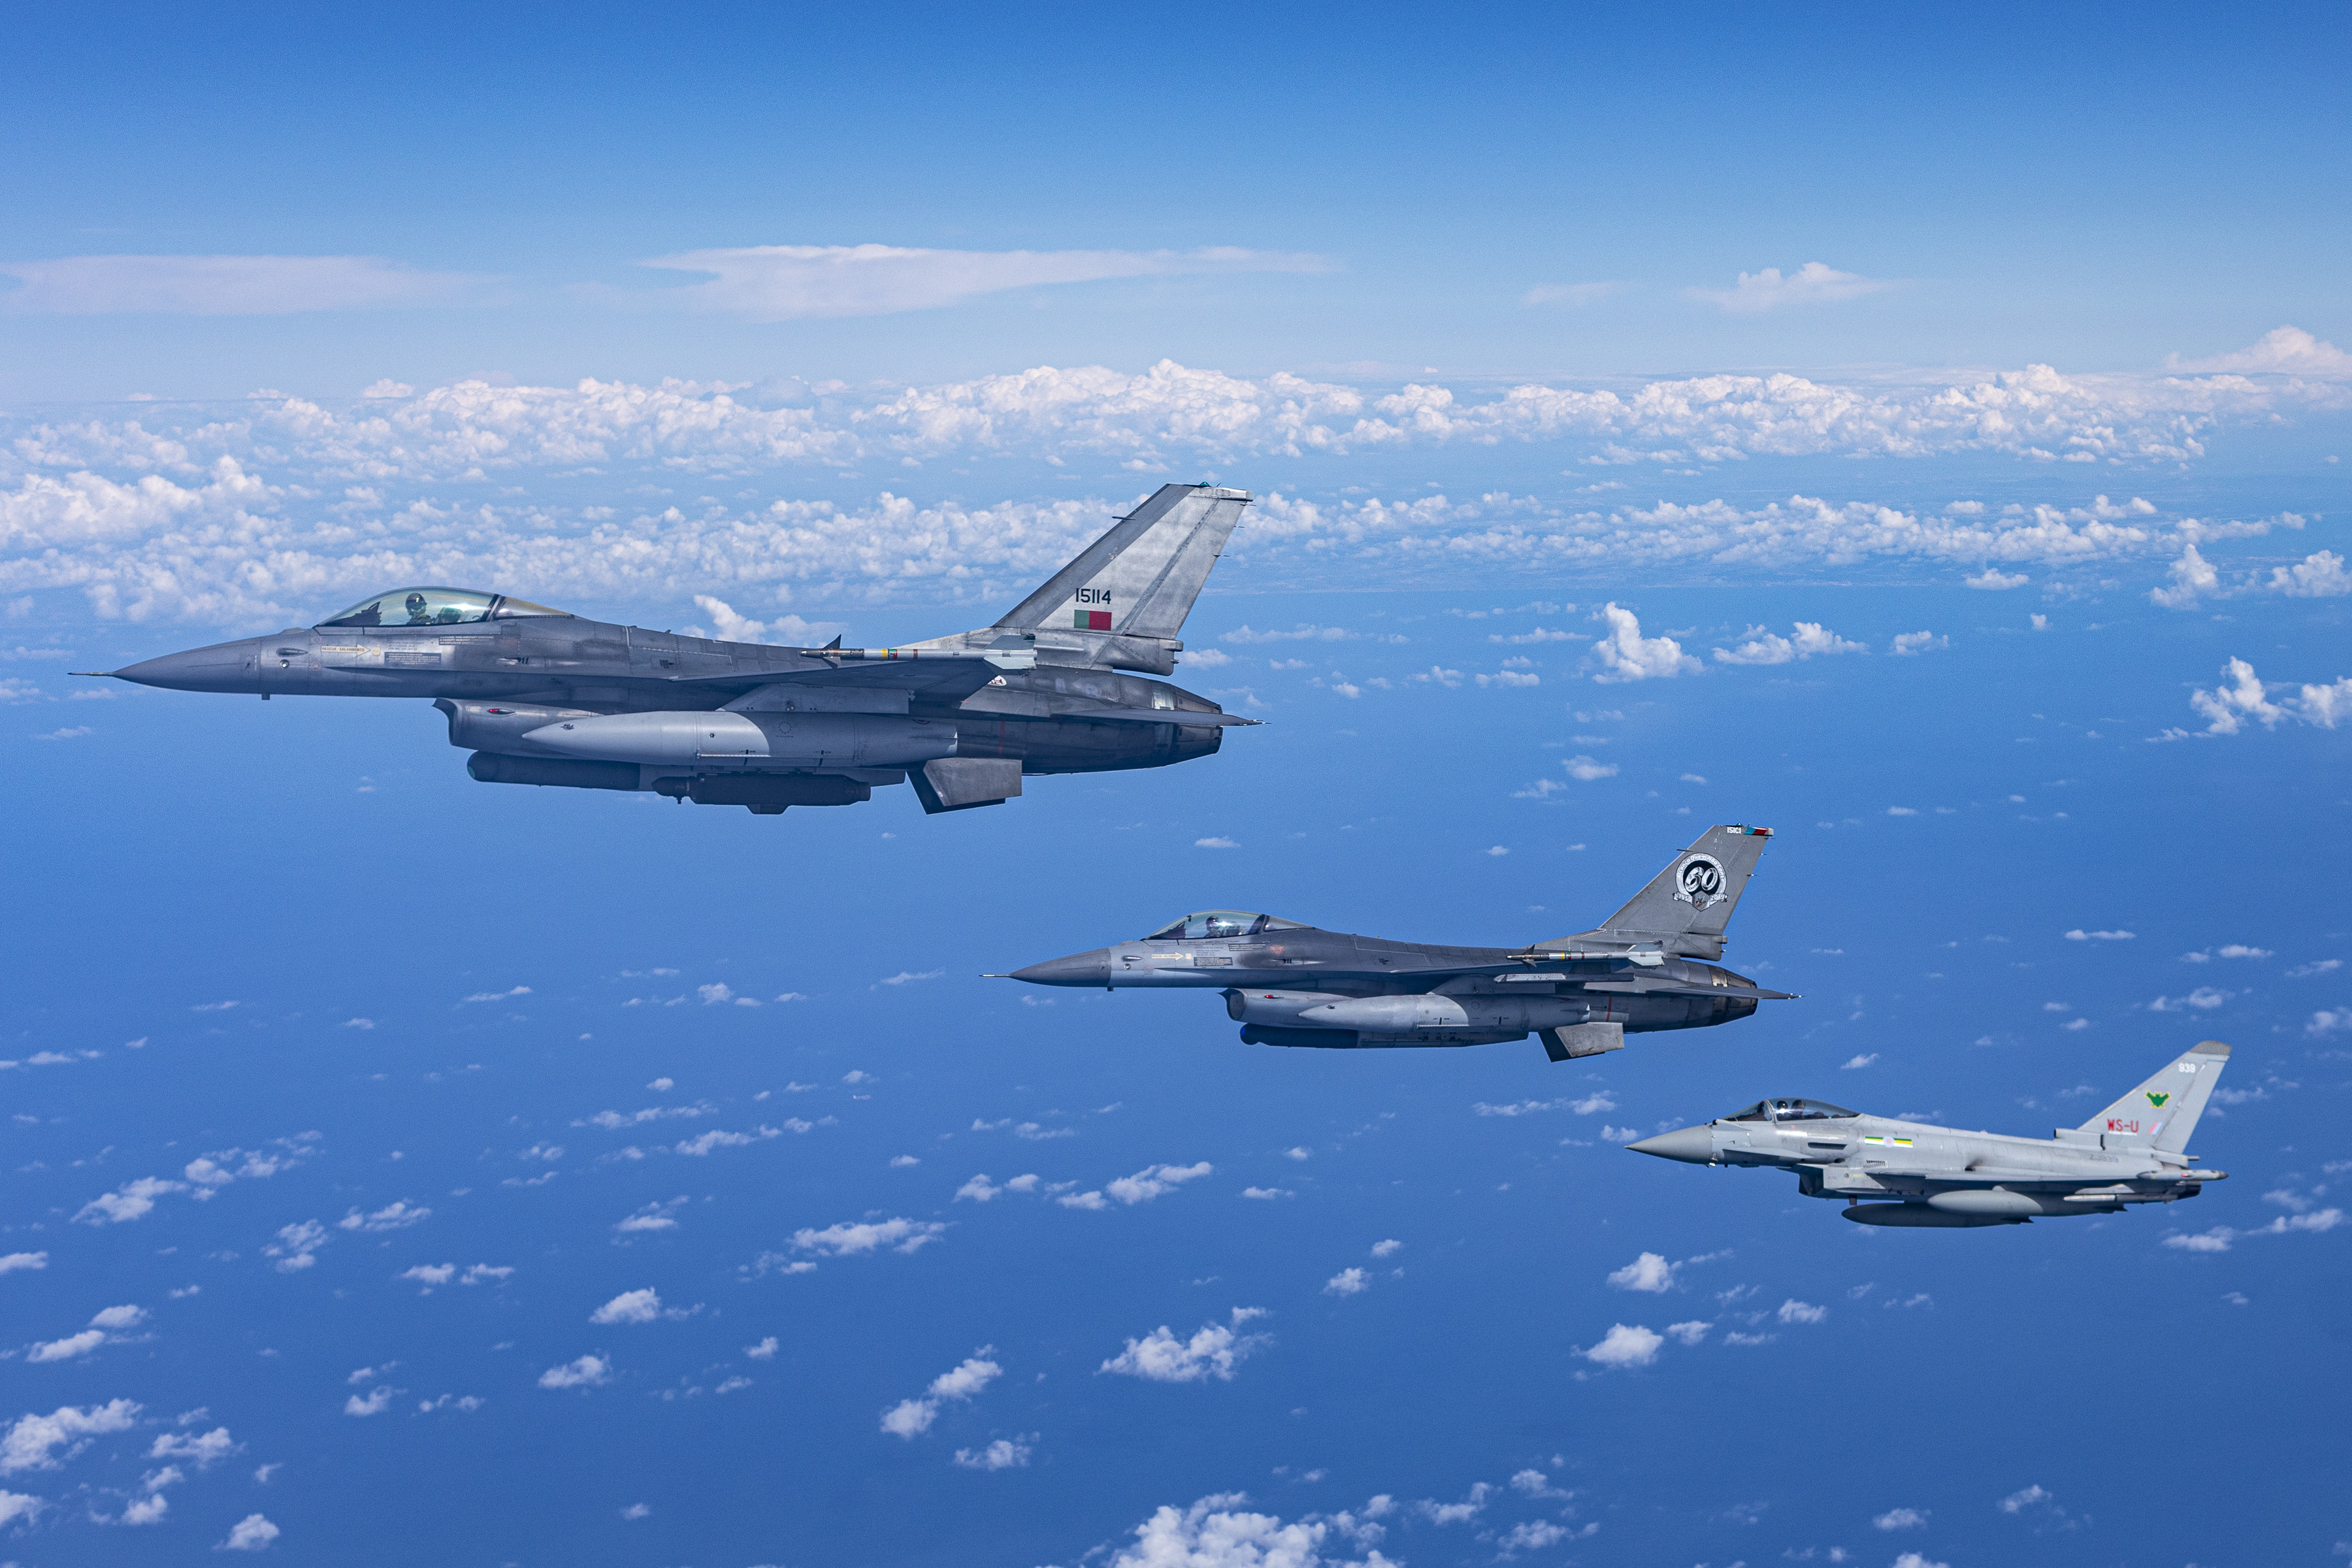 Three Typhoon's in formation.